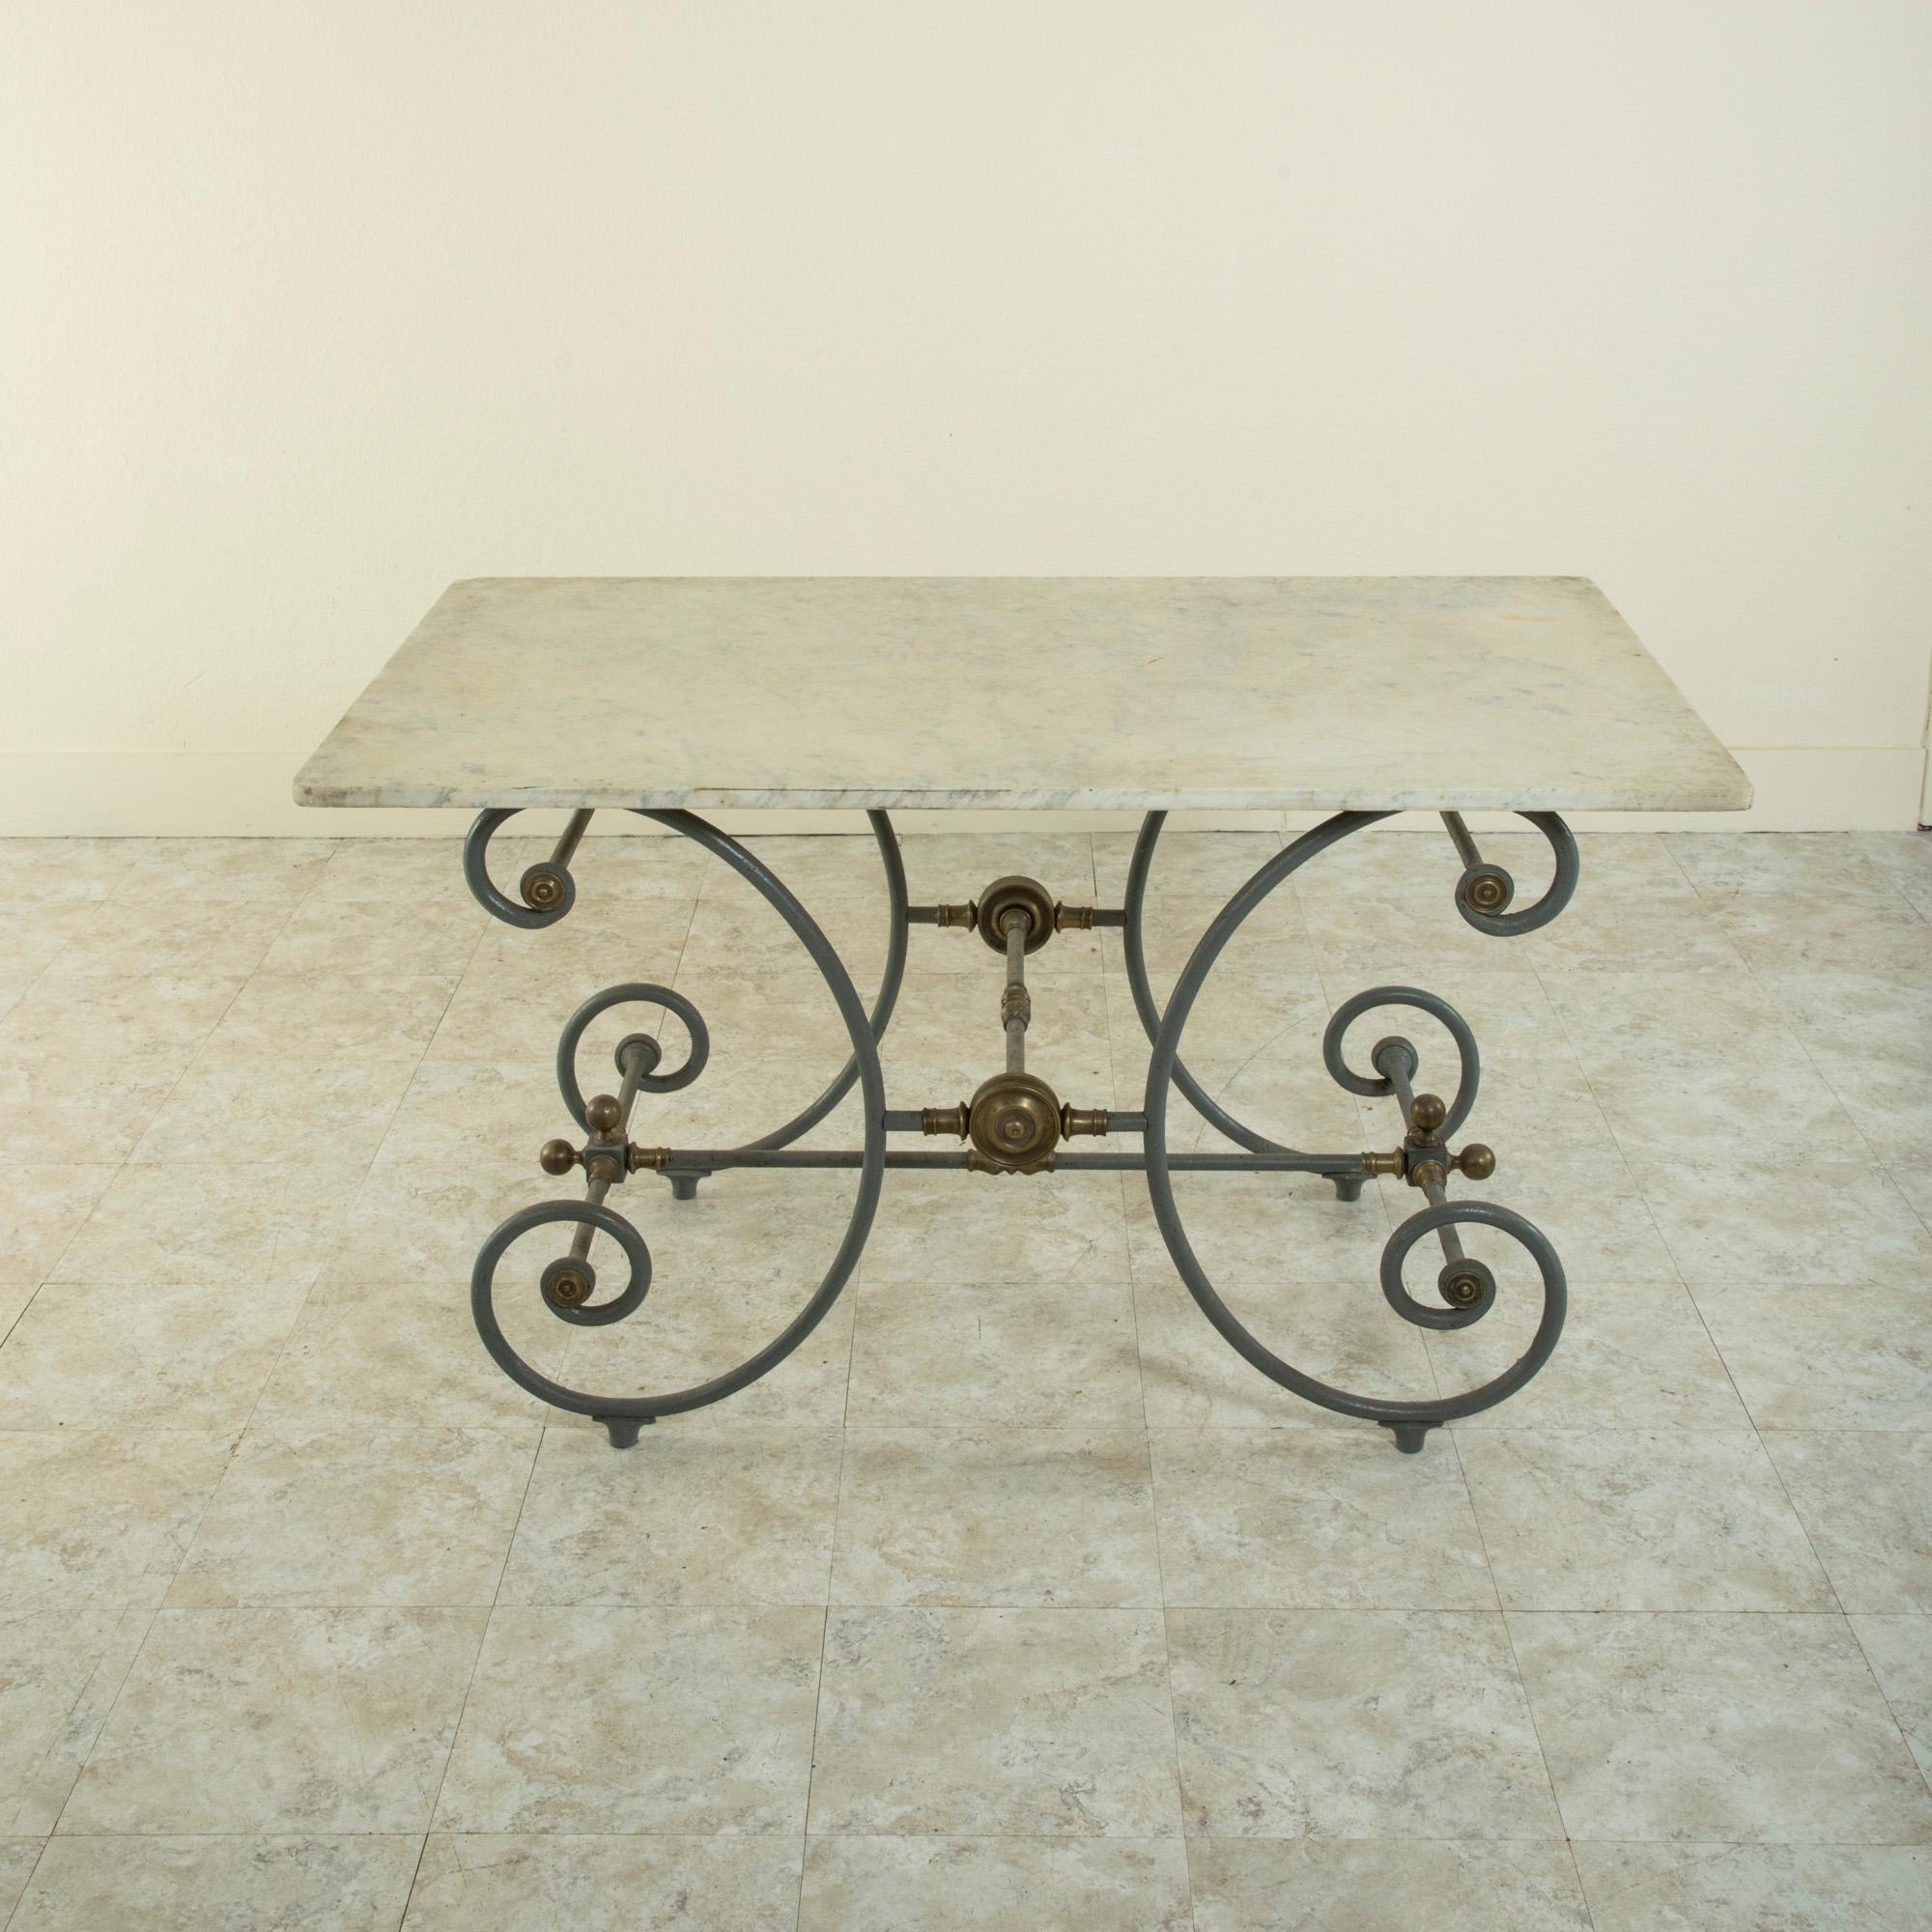 This late nineteenth century French iron pastry table or butcher's table features a solid carrara marble top. The marble rests on a scrolled, painted iron base. Brass medallions and finials adorn the supports connecting the legs. Ideal for use as a